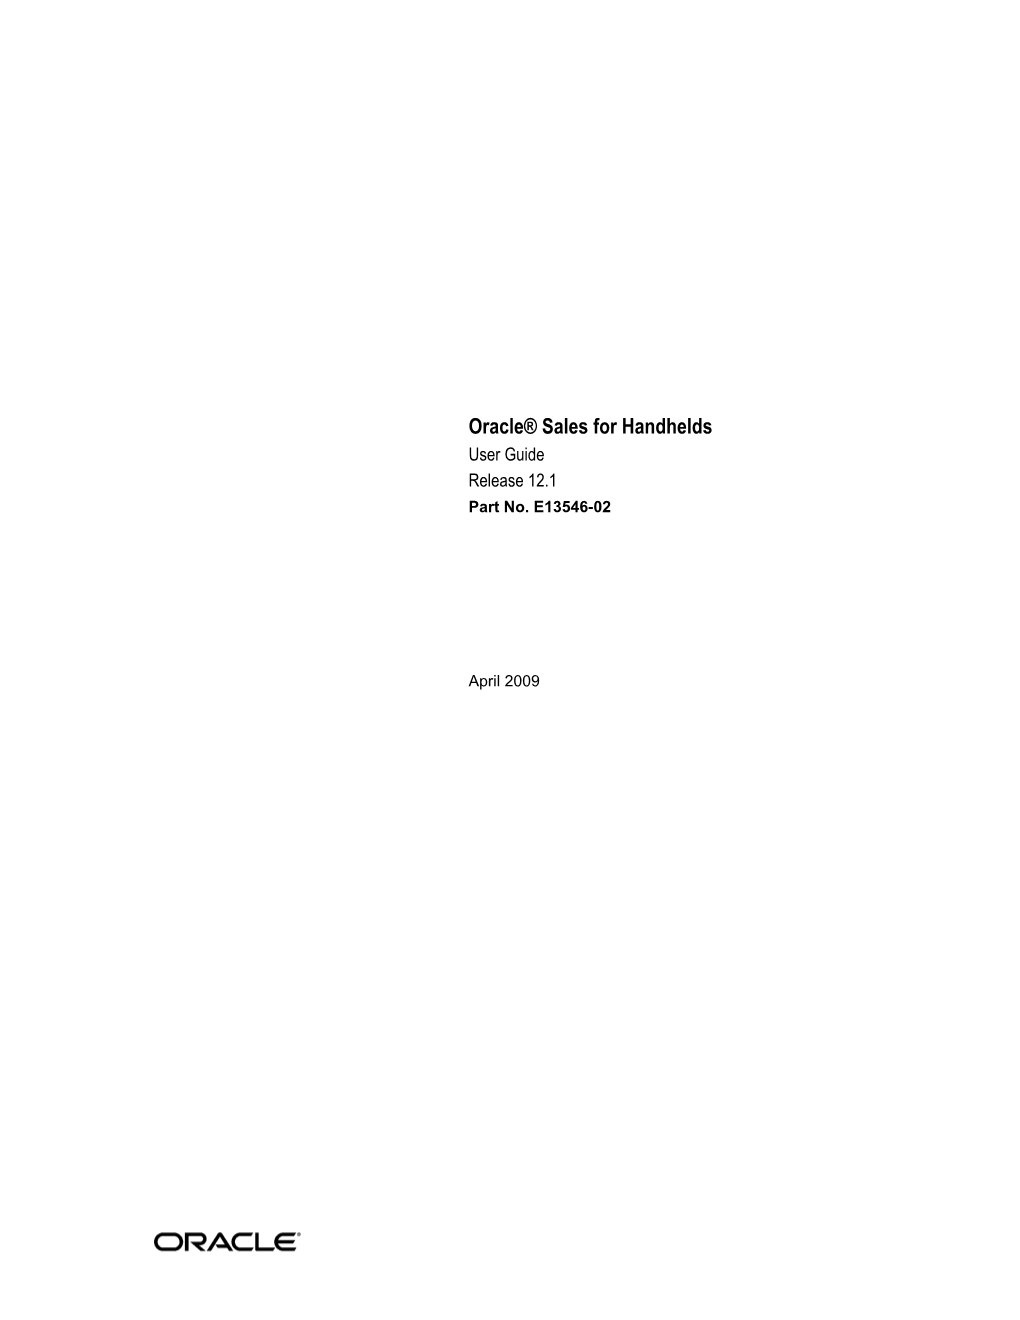 Oracle Sales for Handhelds User Guide, Release 12.1